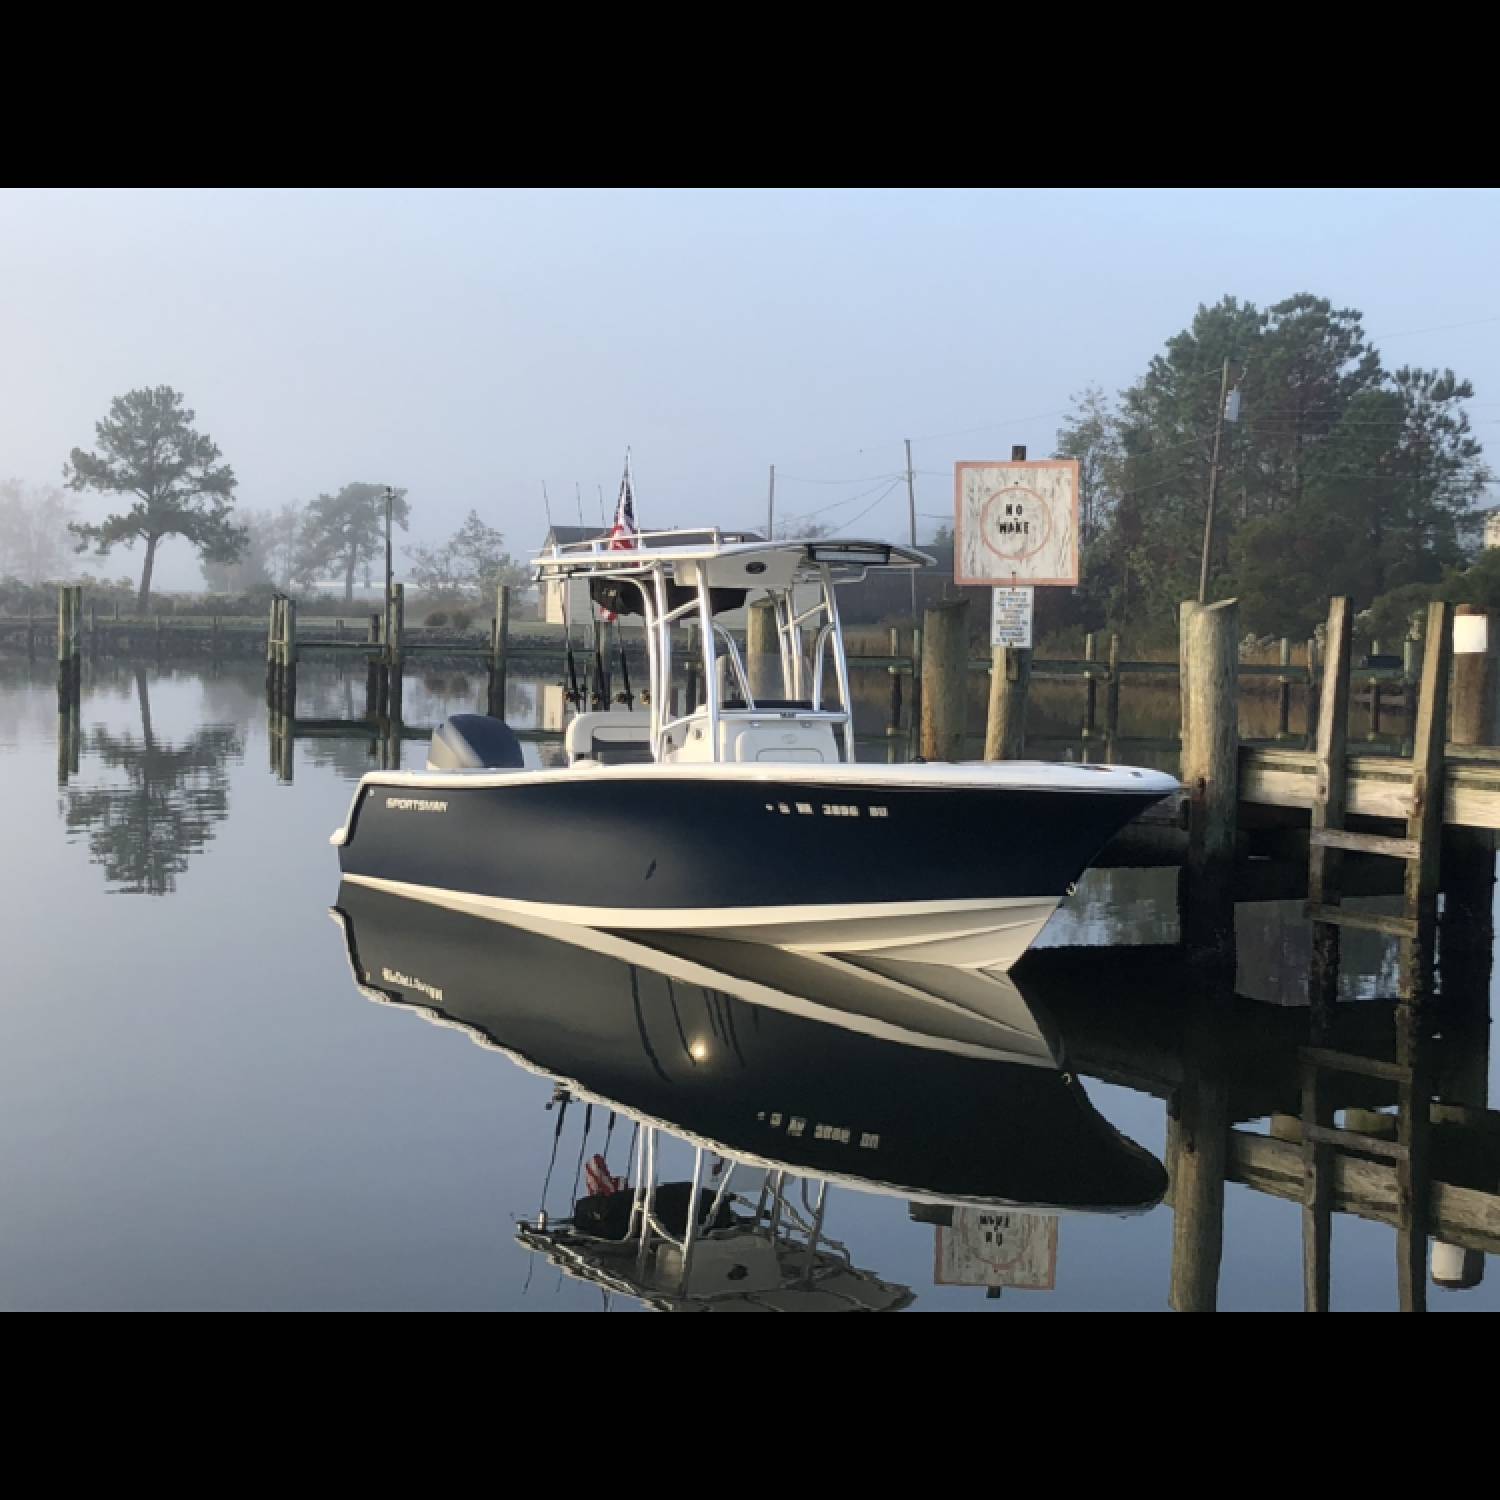 Title: Early morning dew - On board their Sportsman Heritage 231 Center Console - Location: Gwynns island va. Participating in the Photo Contest #SportsmanSeptember